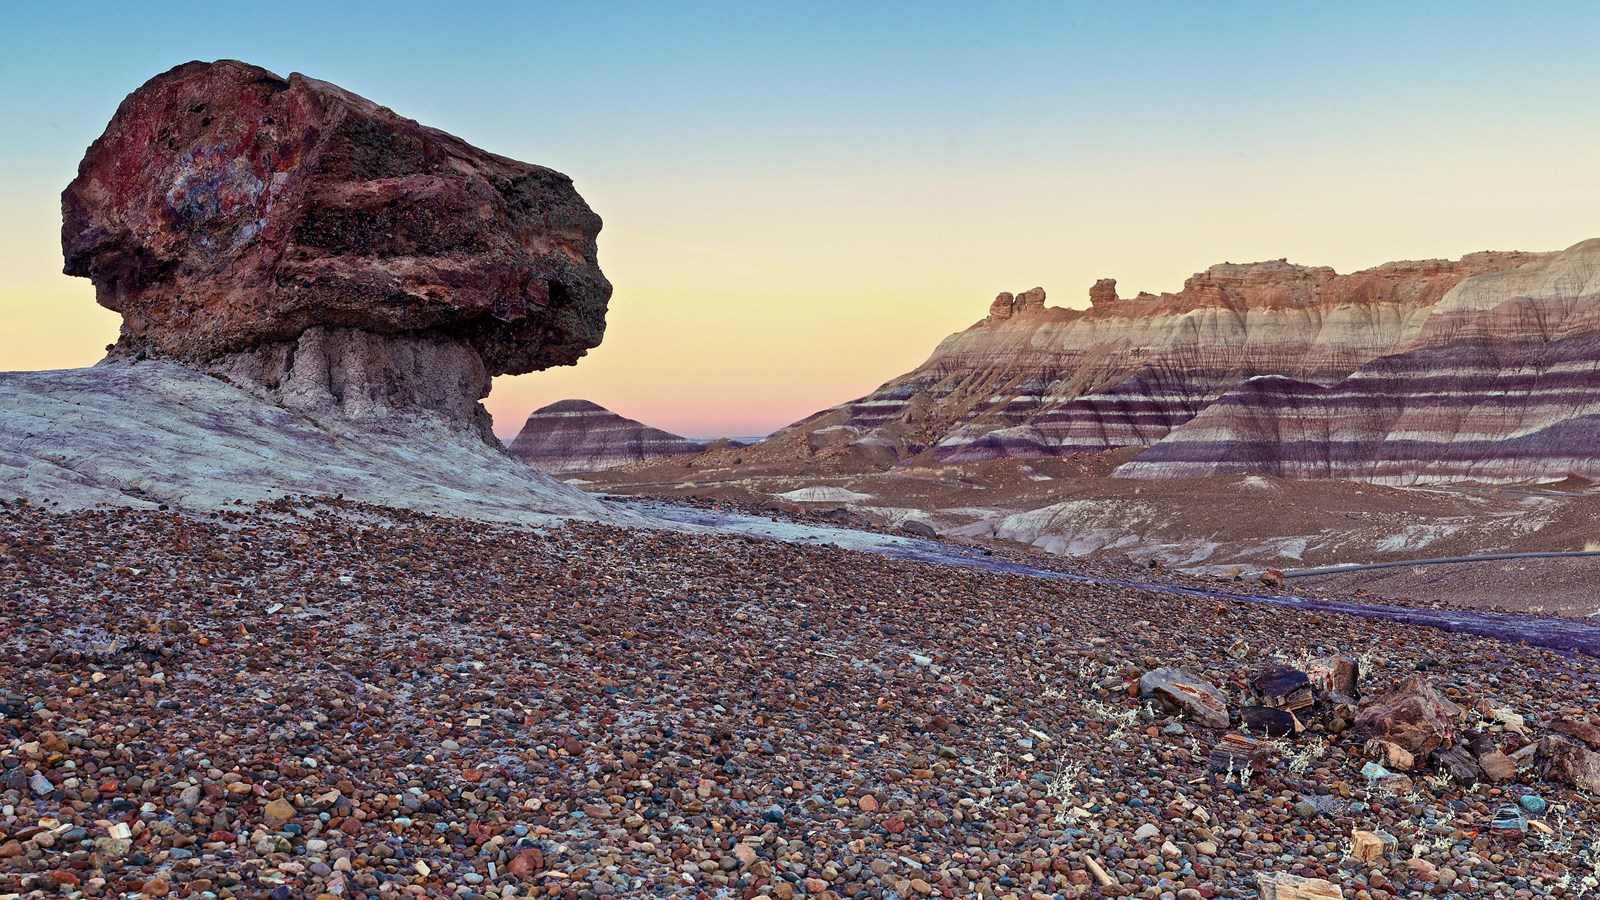 A pedestal log balances in front of a blue, purple, and gray banded badland at twilight.